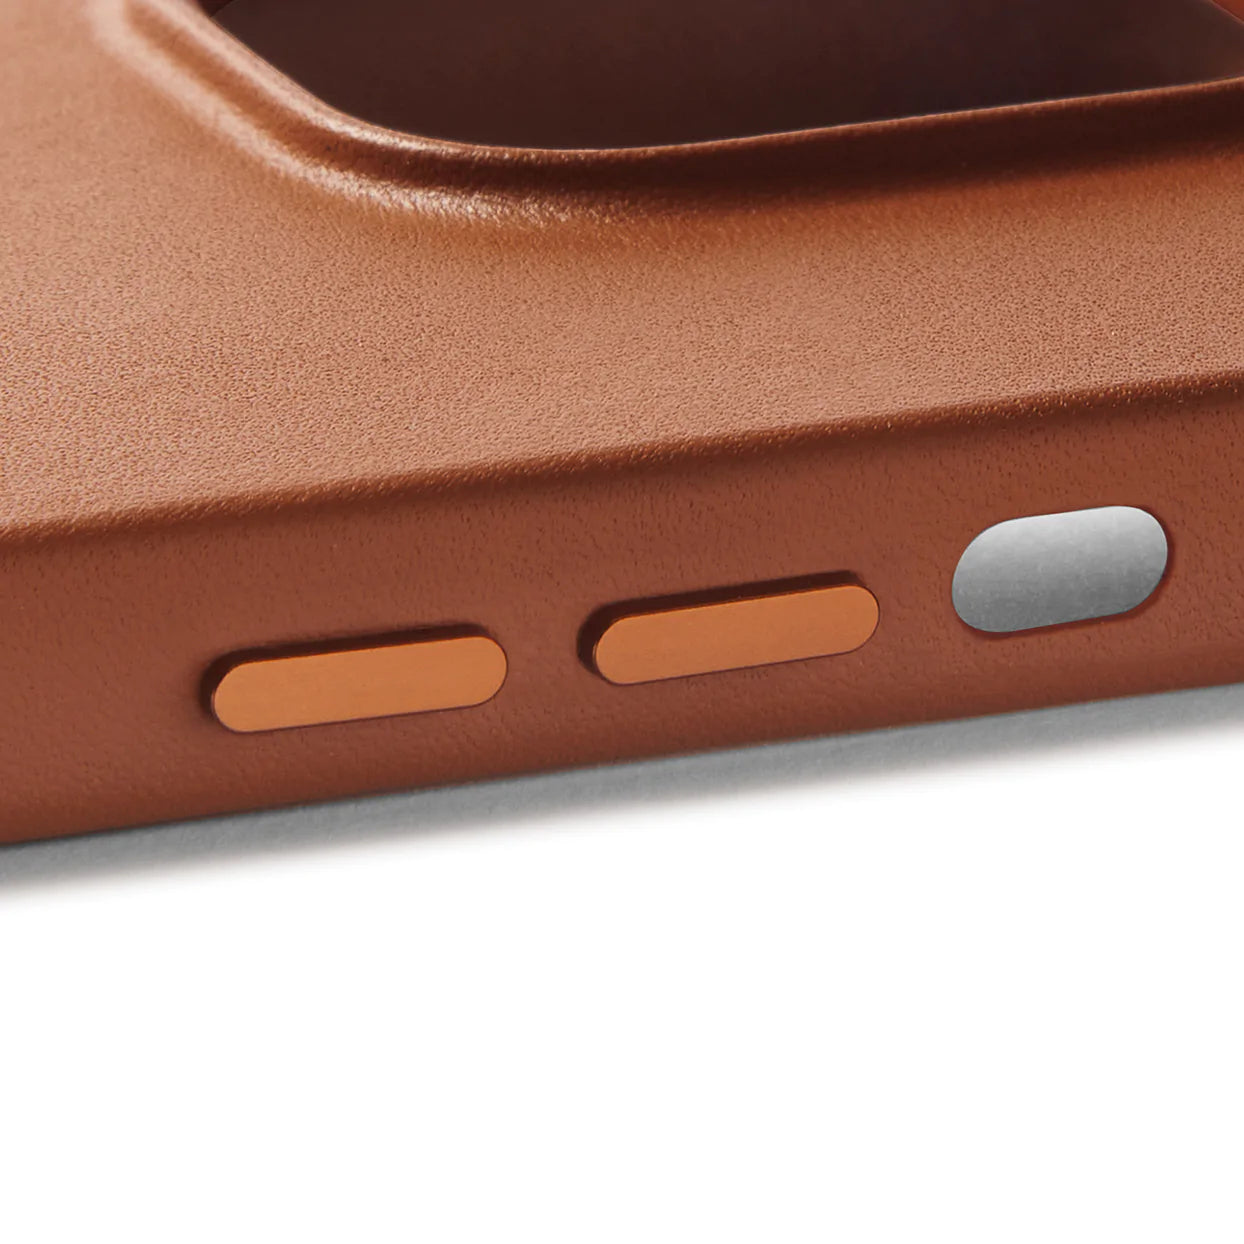 Mujjo Full Leather Case for iPhone 14 (Magsafe)